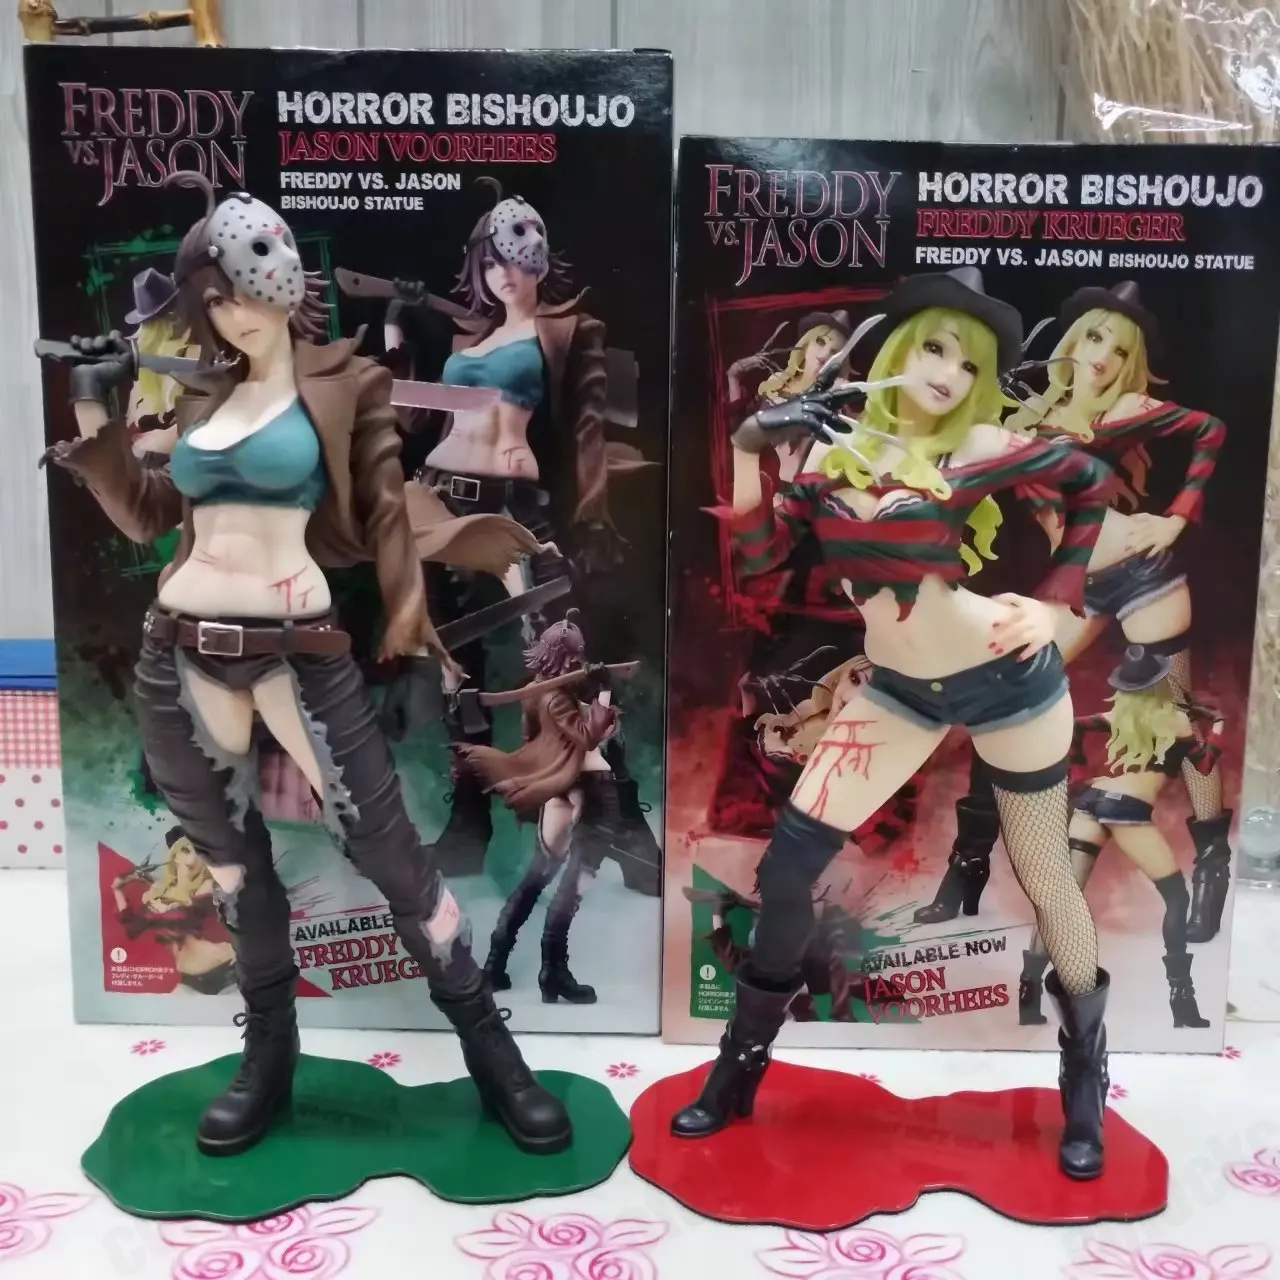 

Freddy vs.Jason Horror Bishoujo Jason Voorhees Freddy Krueger 2nd Edition PVC Action Figure Anime Figure Collectible Doll Gift